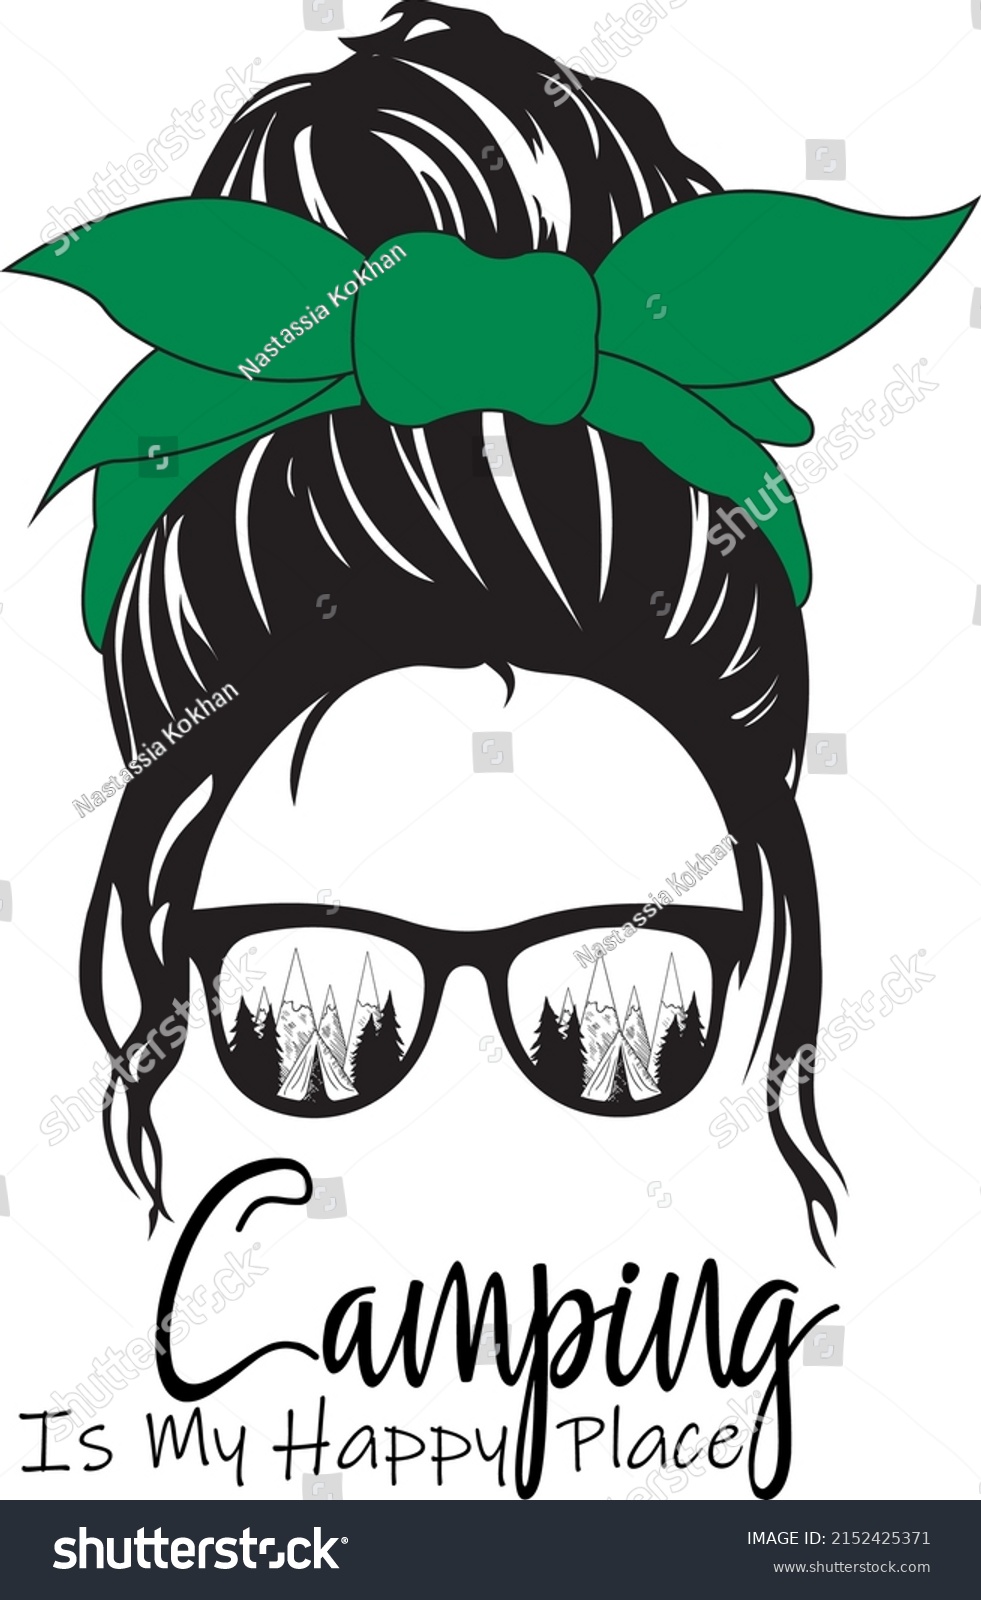 SVG of Camping is my happy place Svg vector Illustration isolated on white background. Camping messy bun with green bow. Summer vacation shirt design.Camping life decor. Sunglasses with mountains and forest. svg